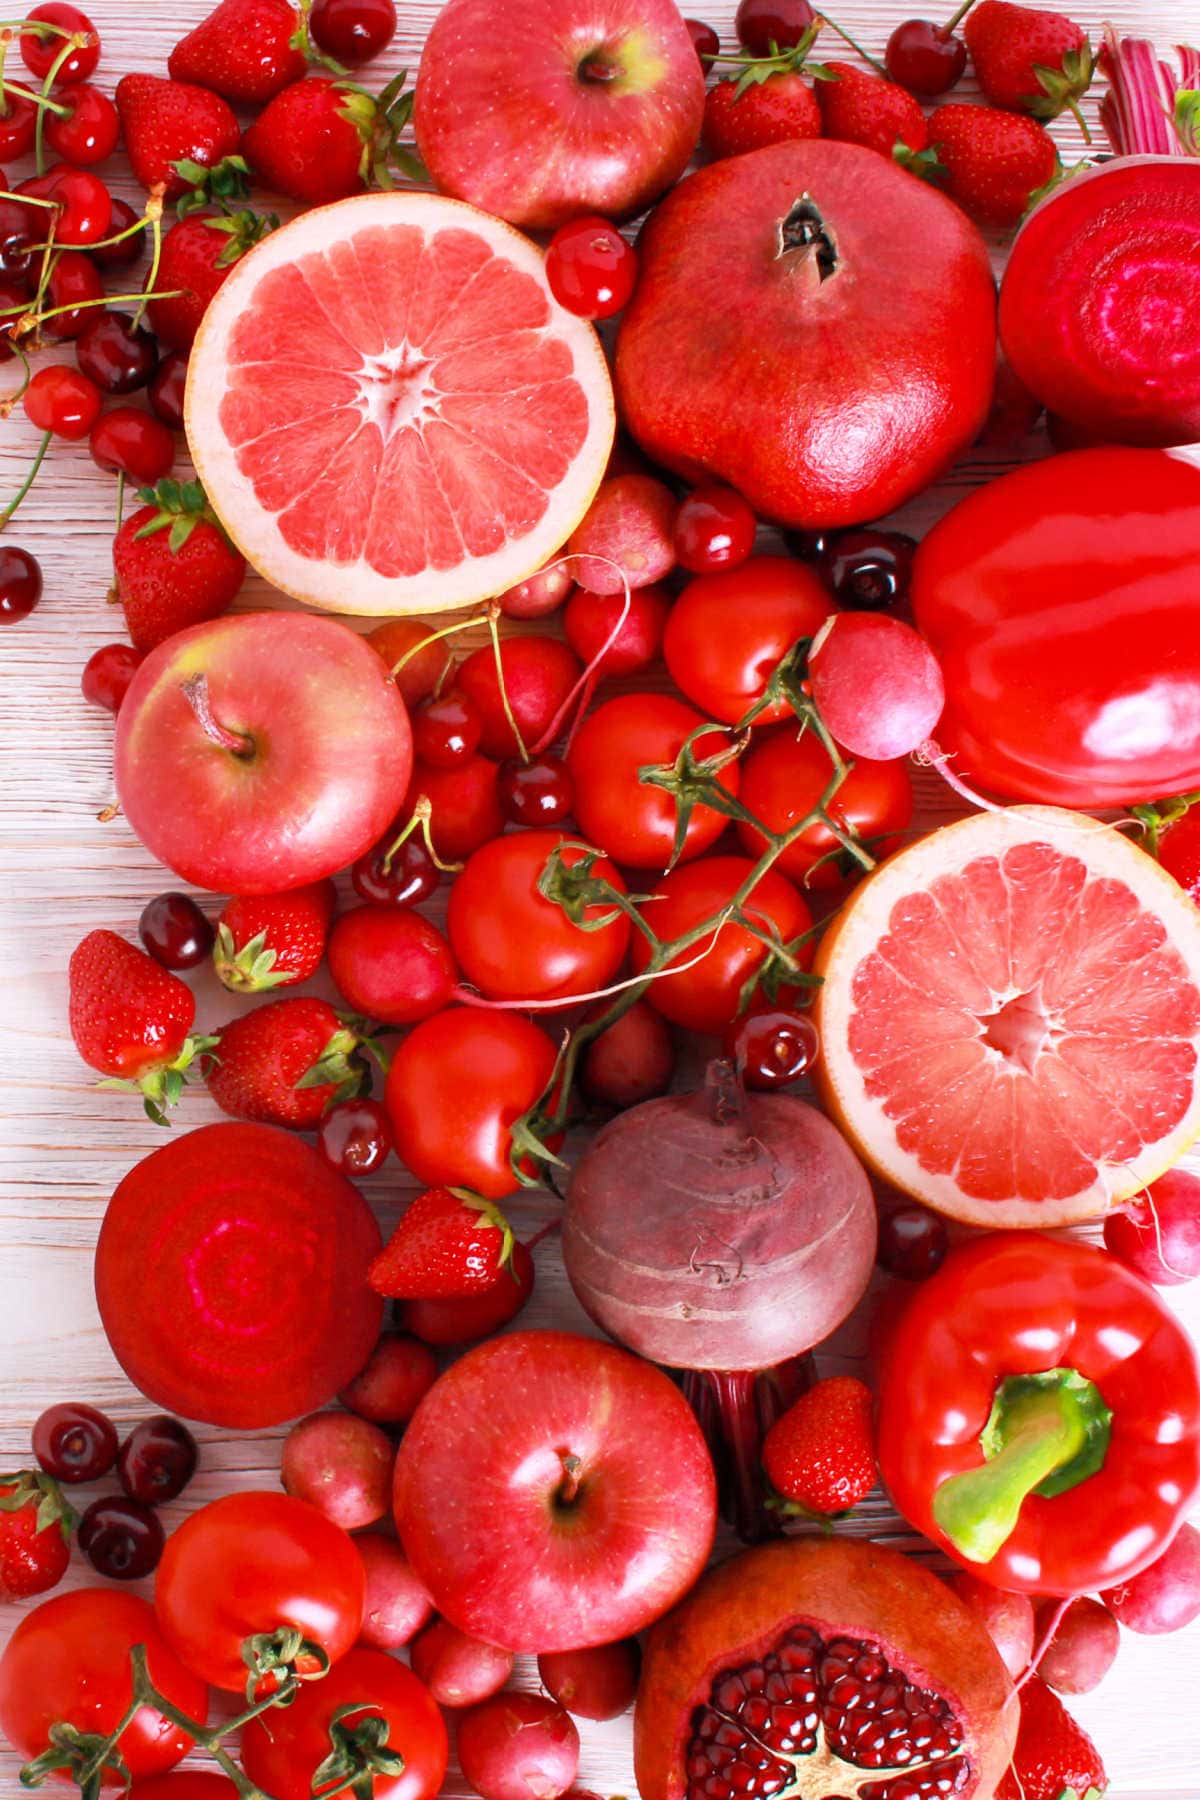 Red Fruits and Vegetables on A Wood Background